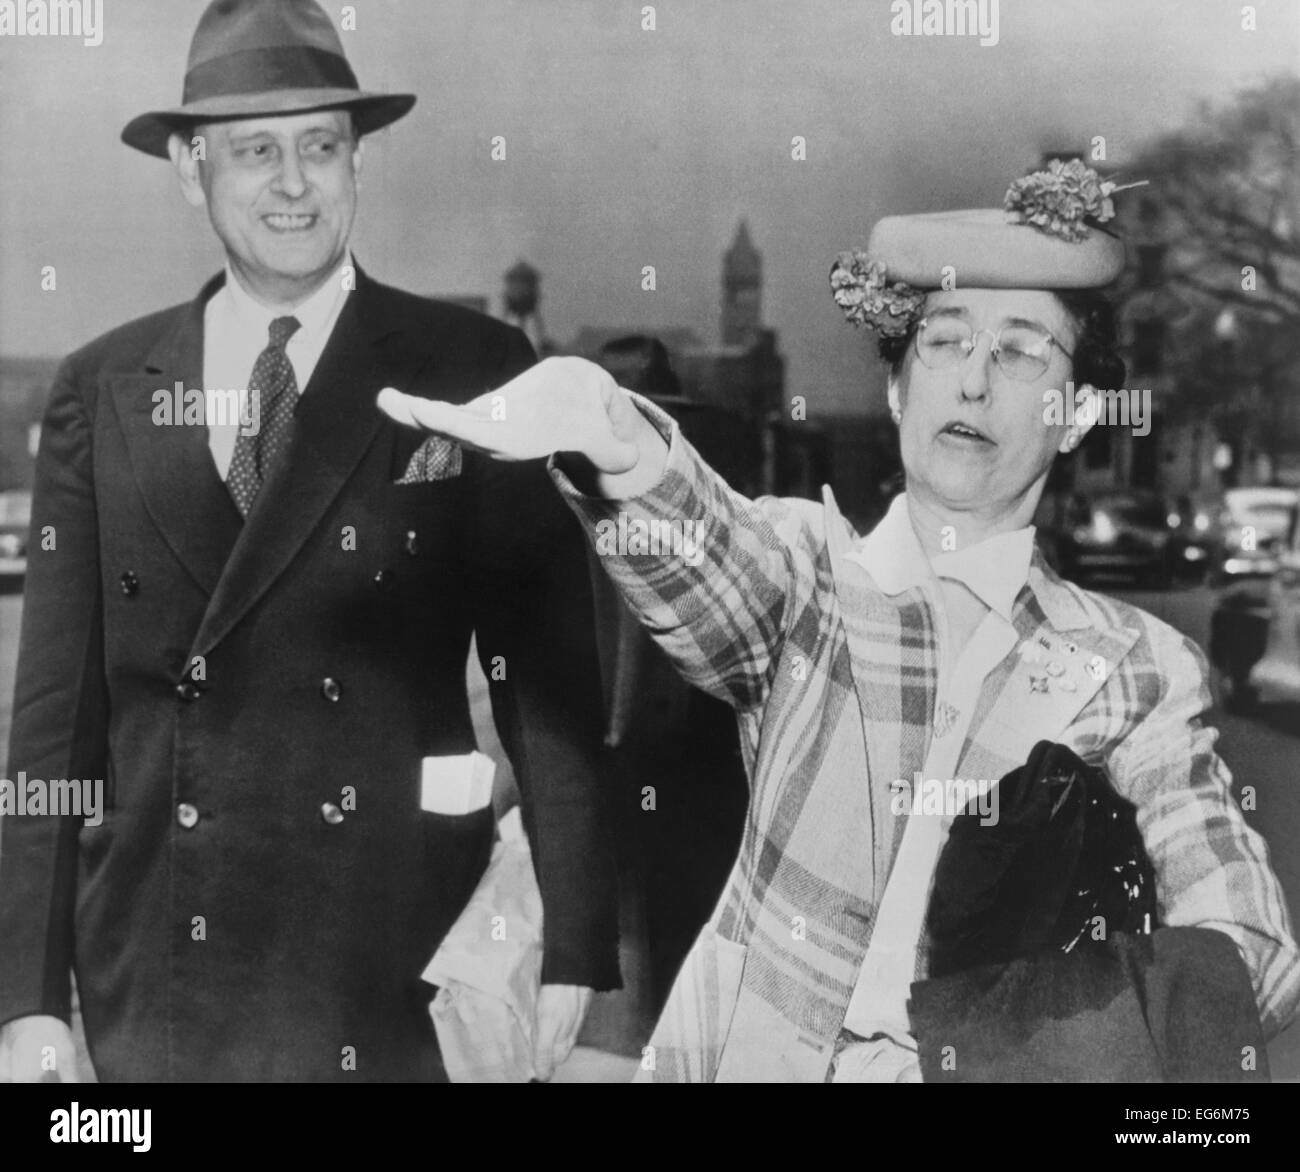 Lois de Lafayette Washburn gives a stiff-armed salute. She and Howard Victor Broenstrupp leave Federal District Court April 17, Stock Photo